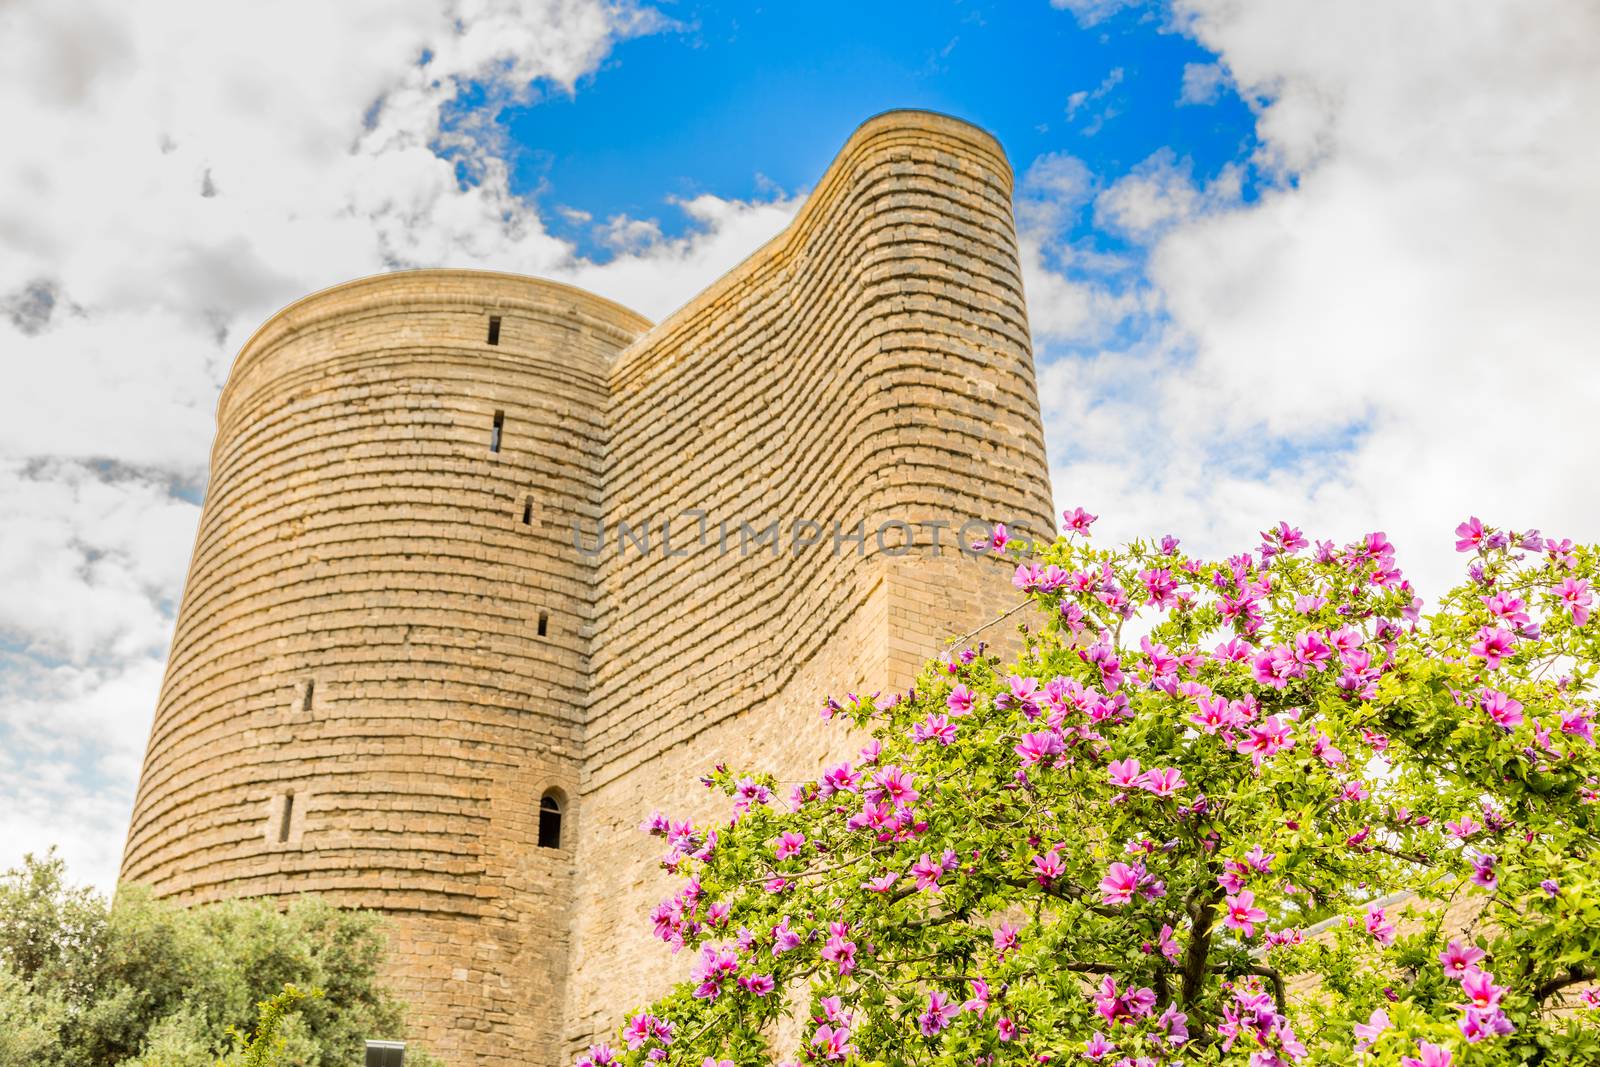 Gız Galası medieval  tower with flowers tree in the foreground by ambeon